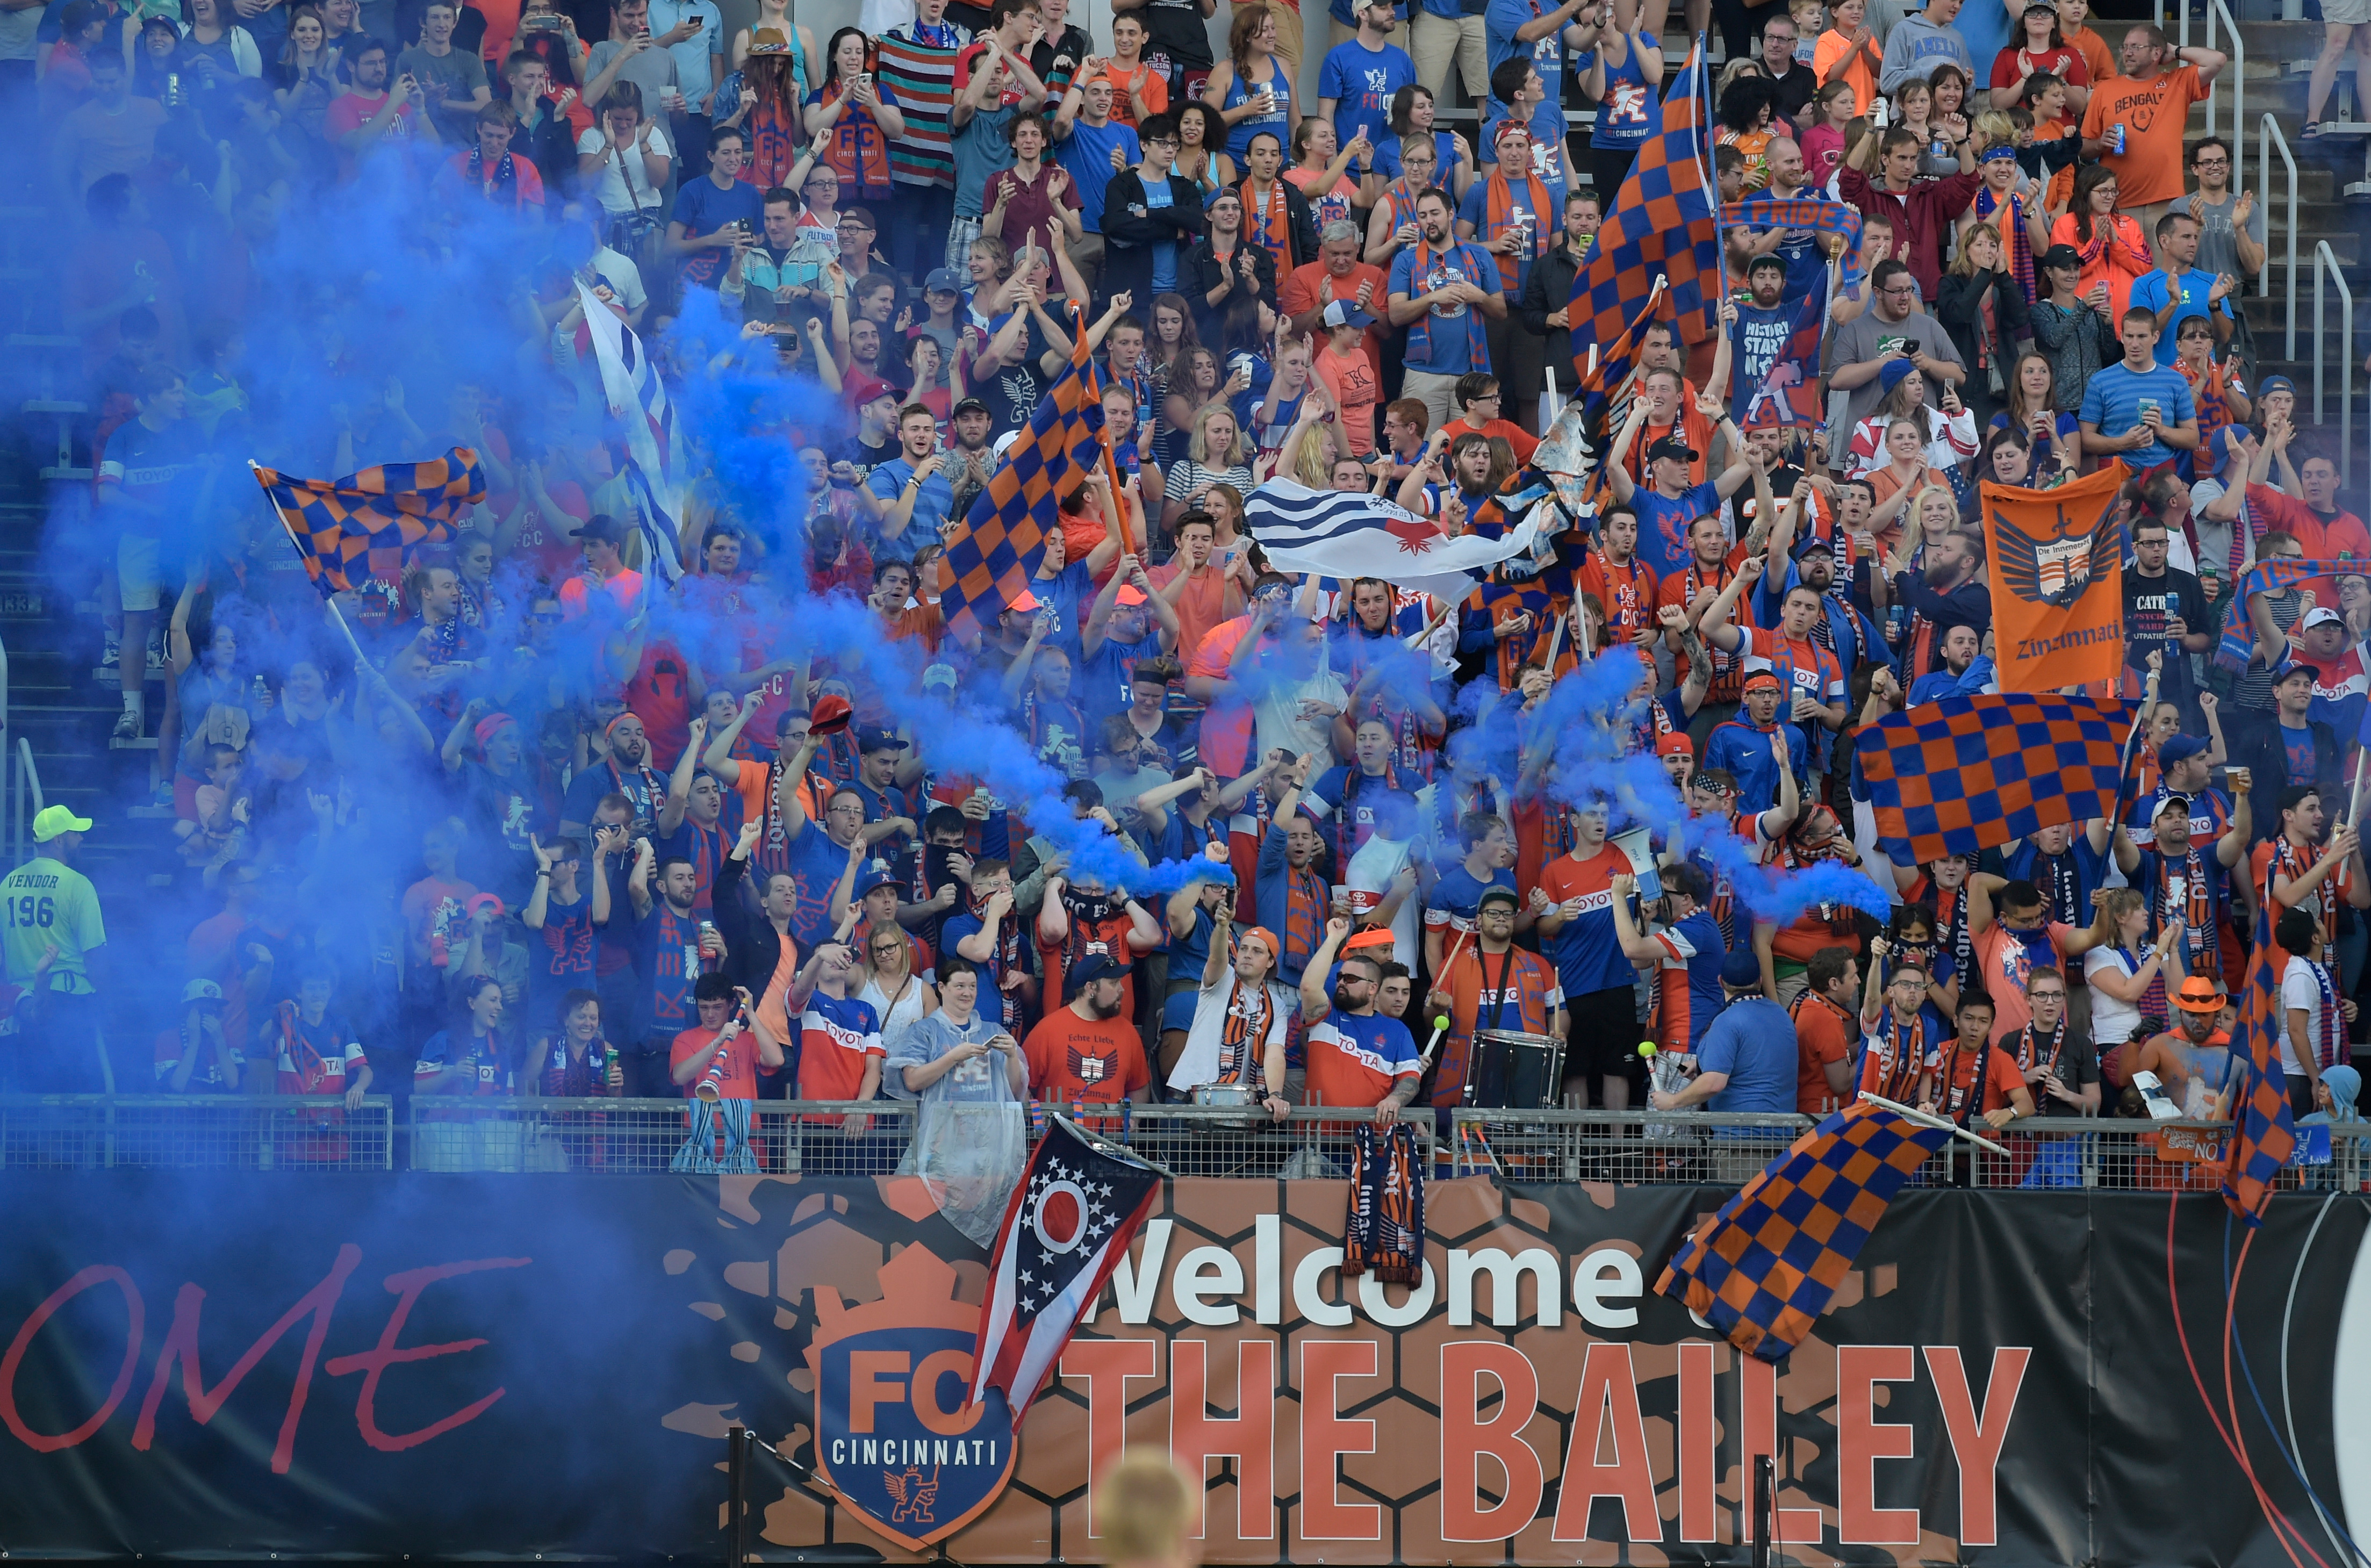 FC Cincinnati filled more seats than Reds on Wednesday